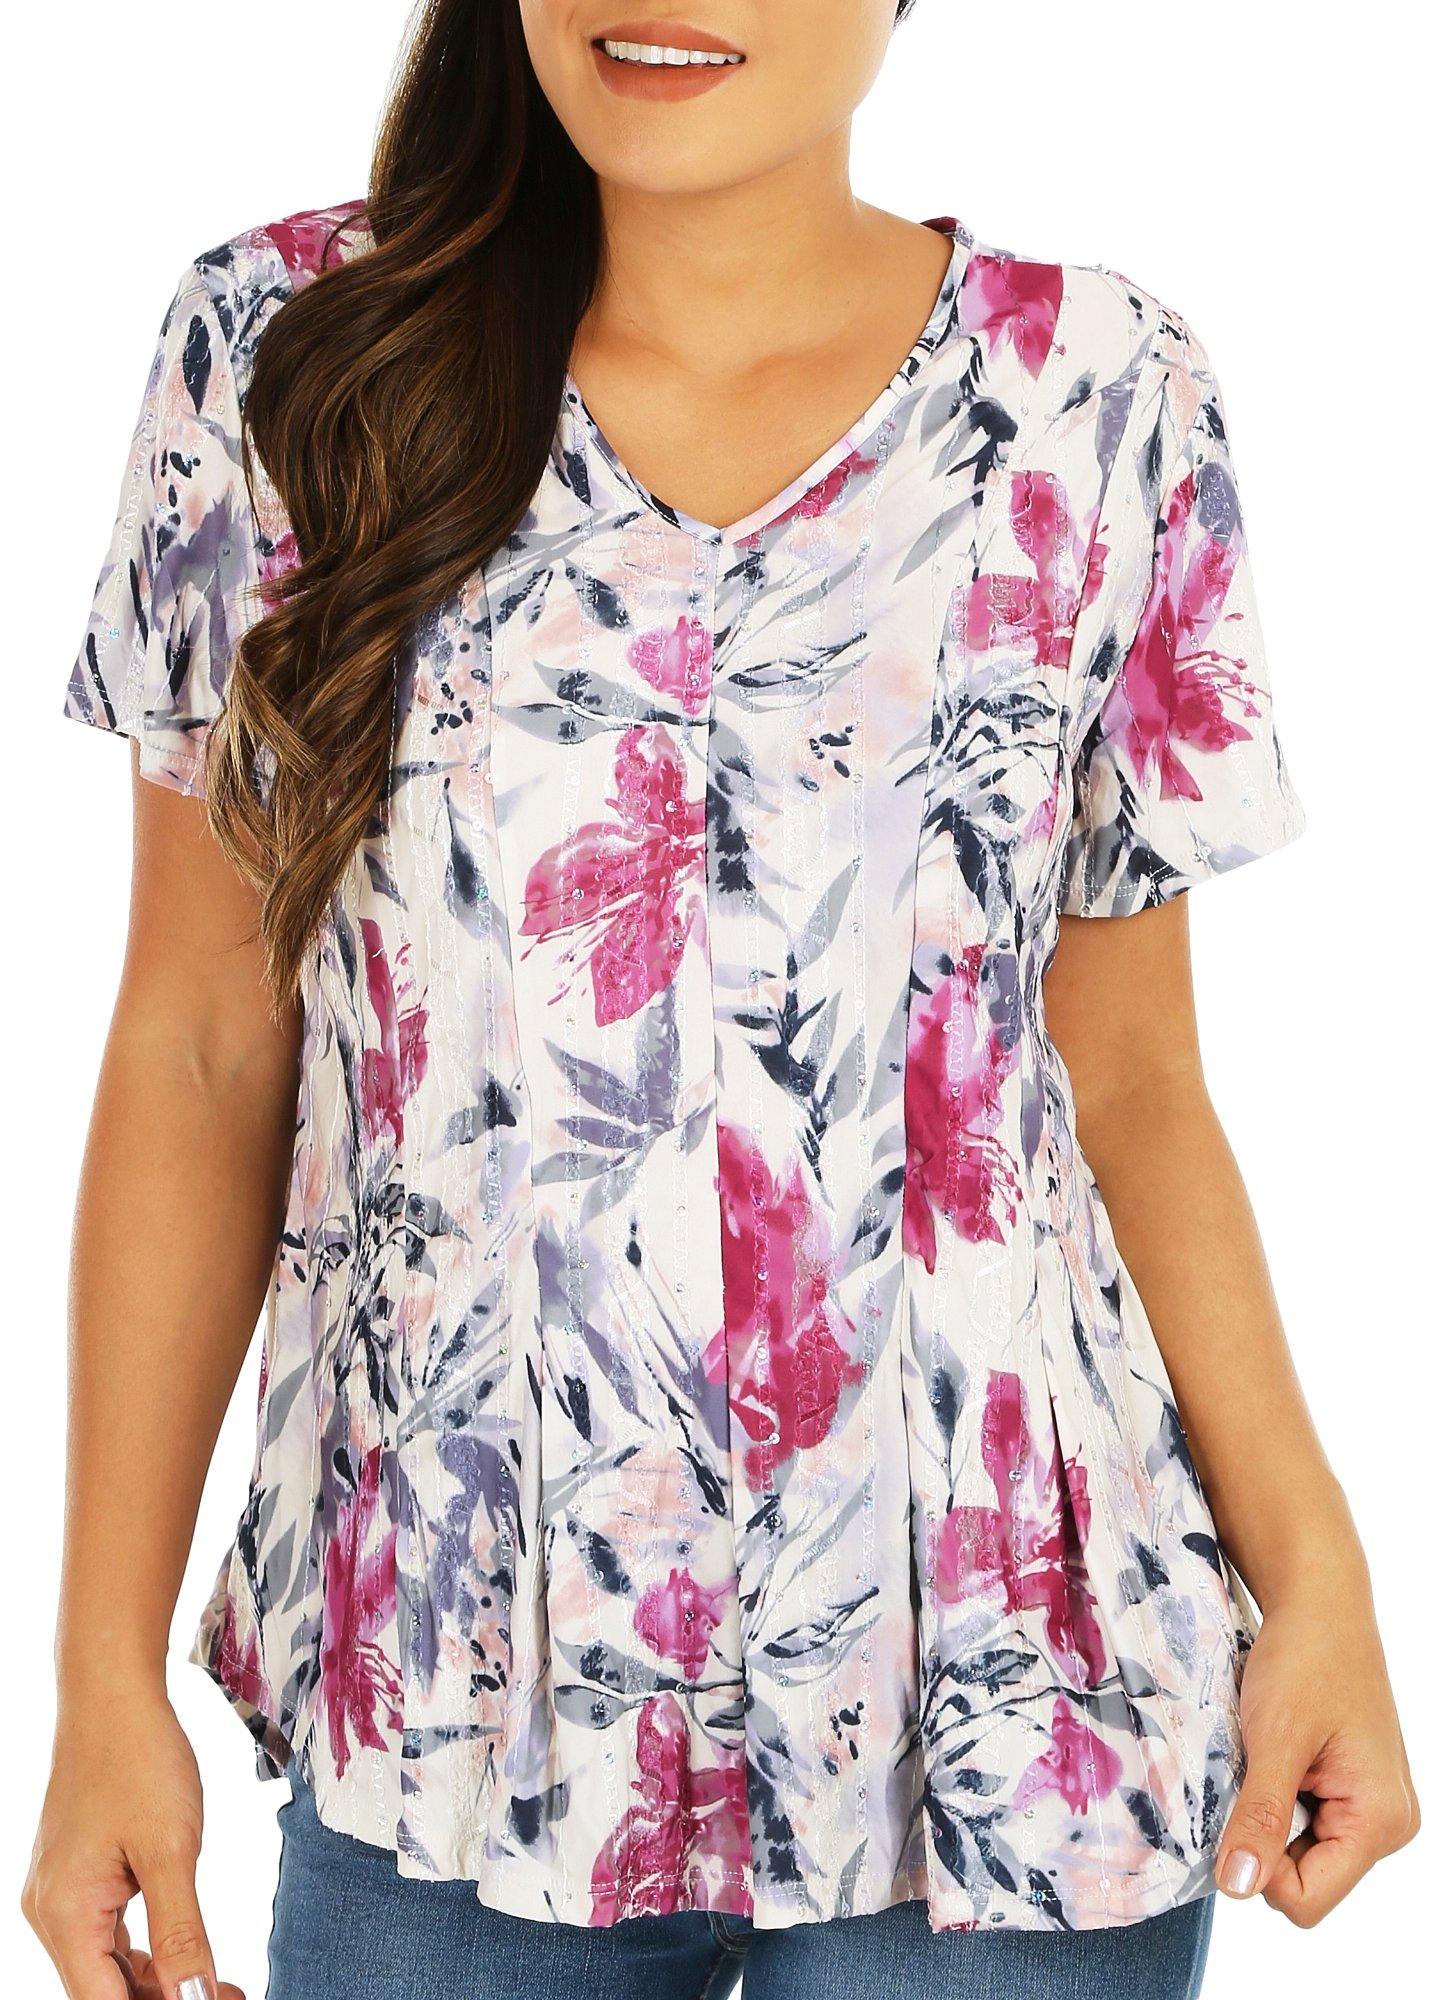 Coral Bay Womens Floral Embellished Pleated Short Sleeve